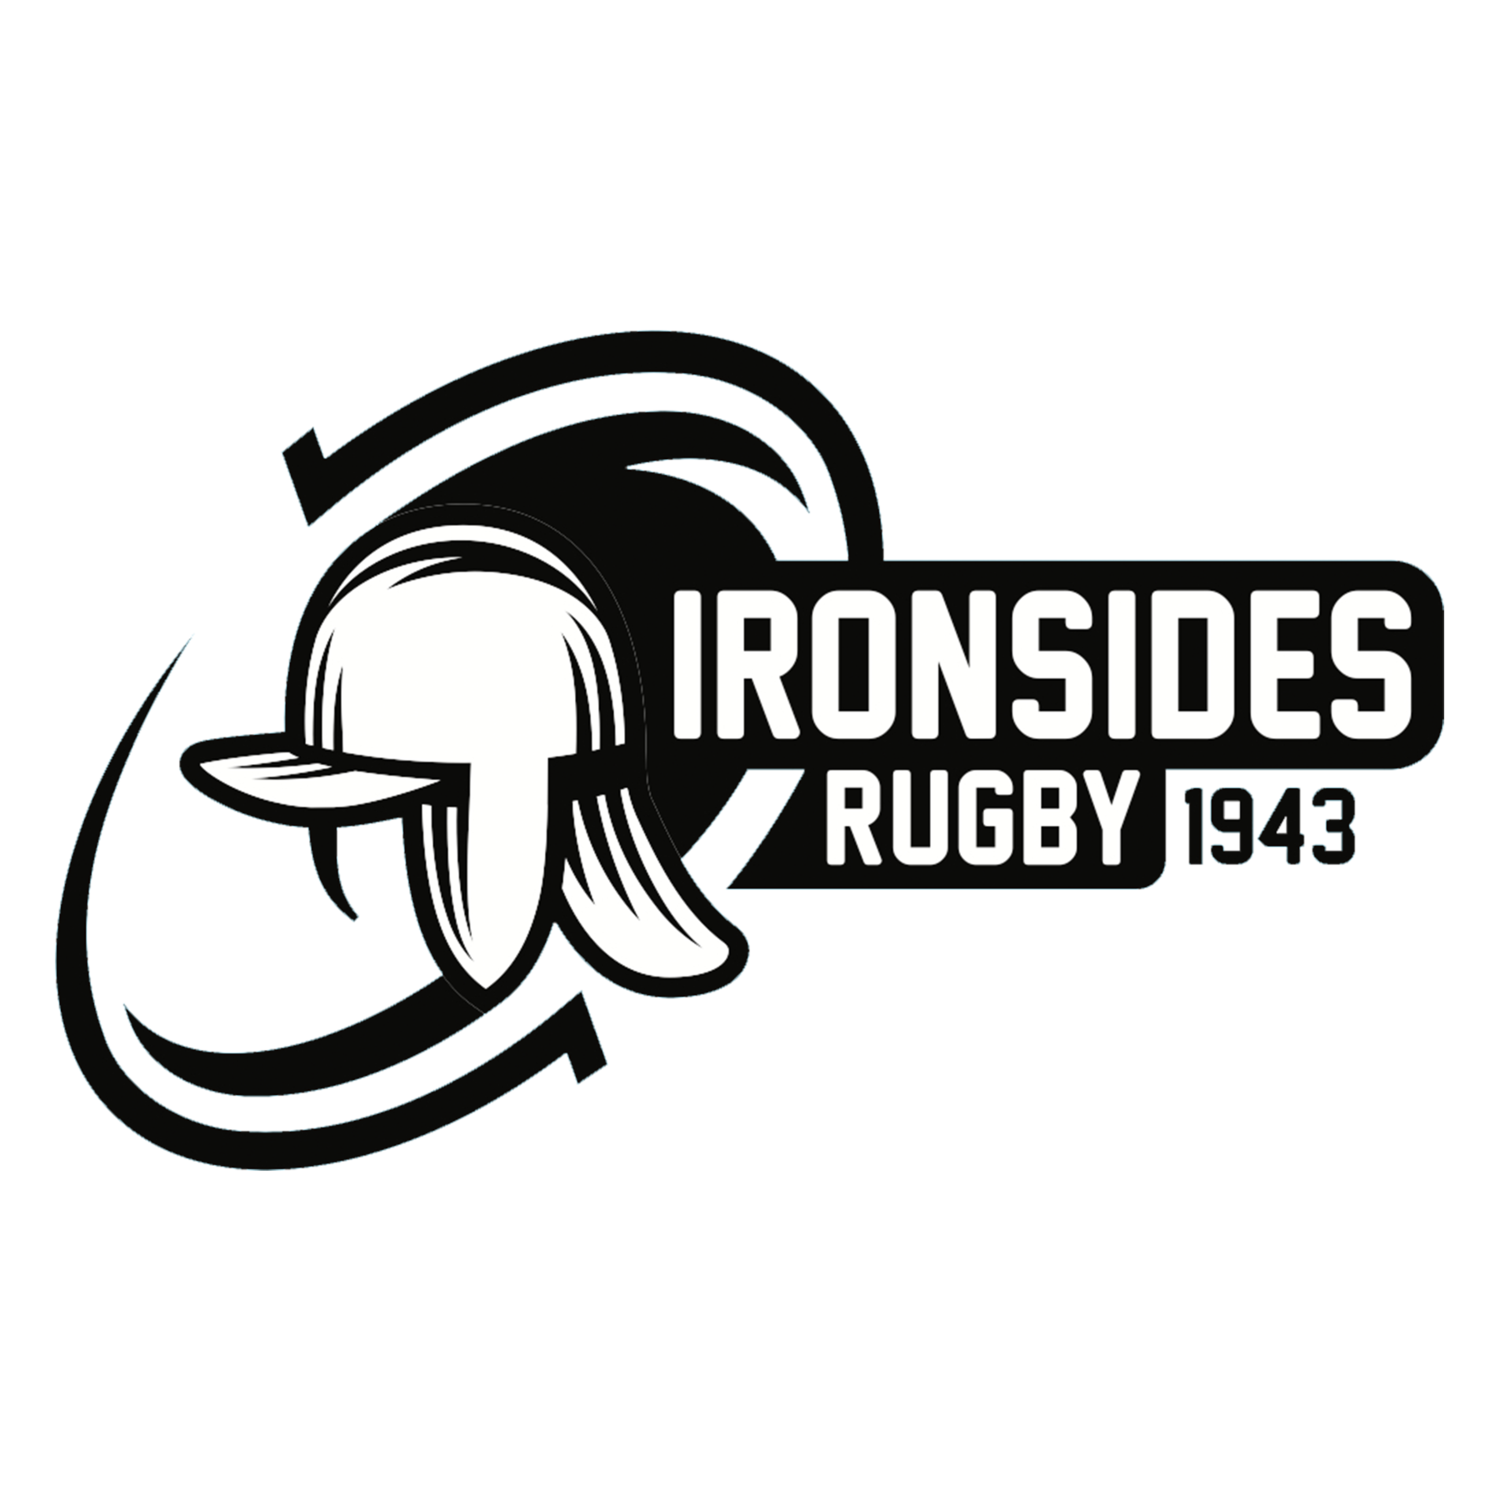 Ironsides Rugby Club